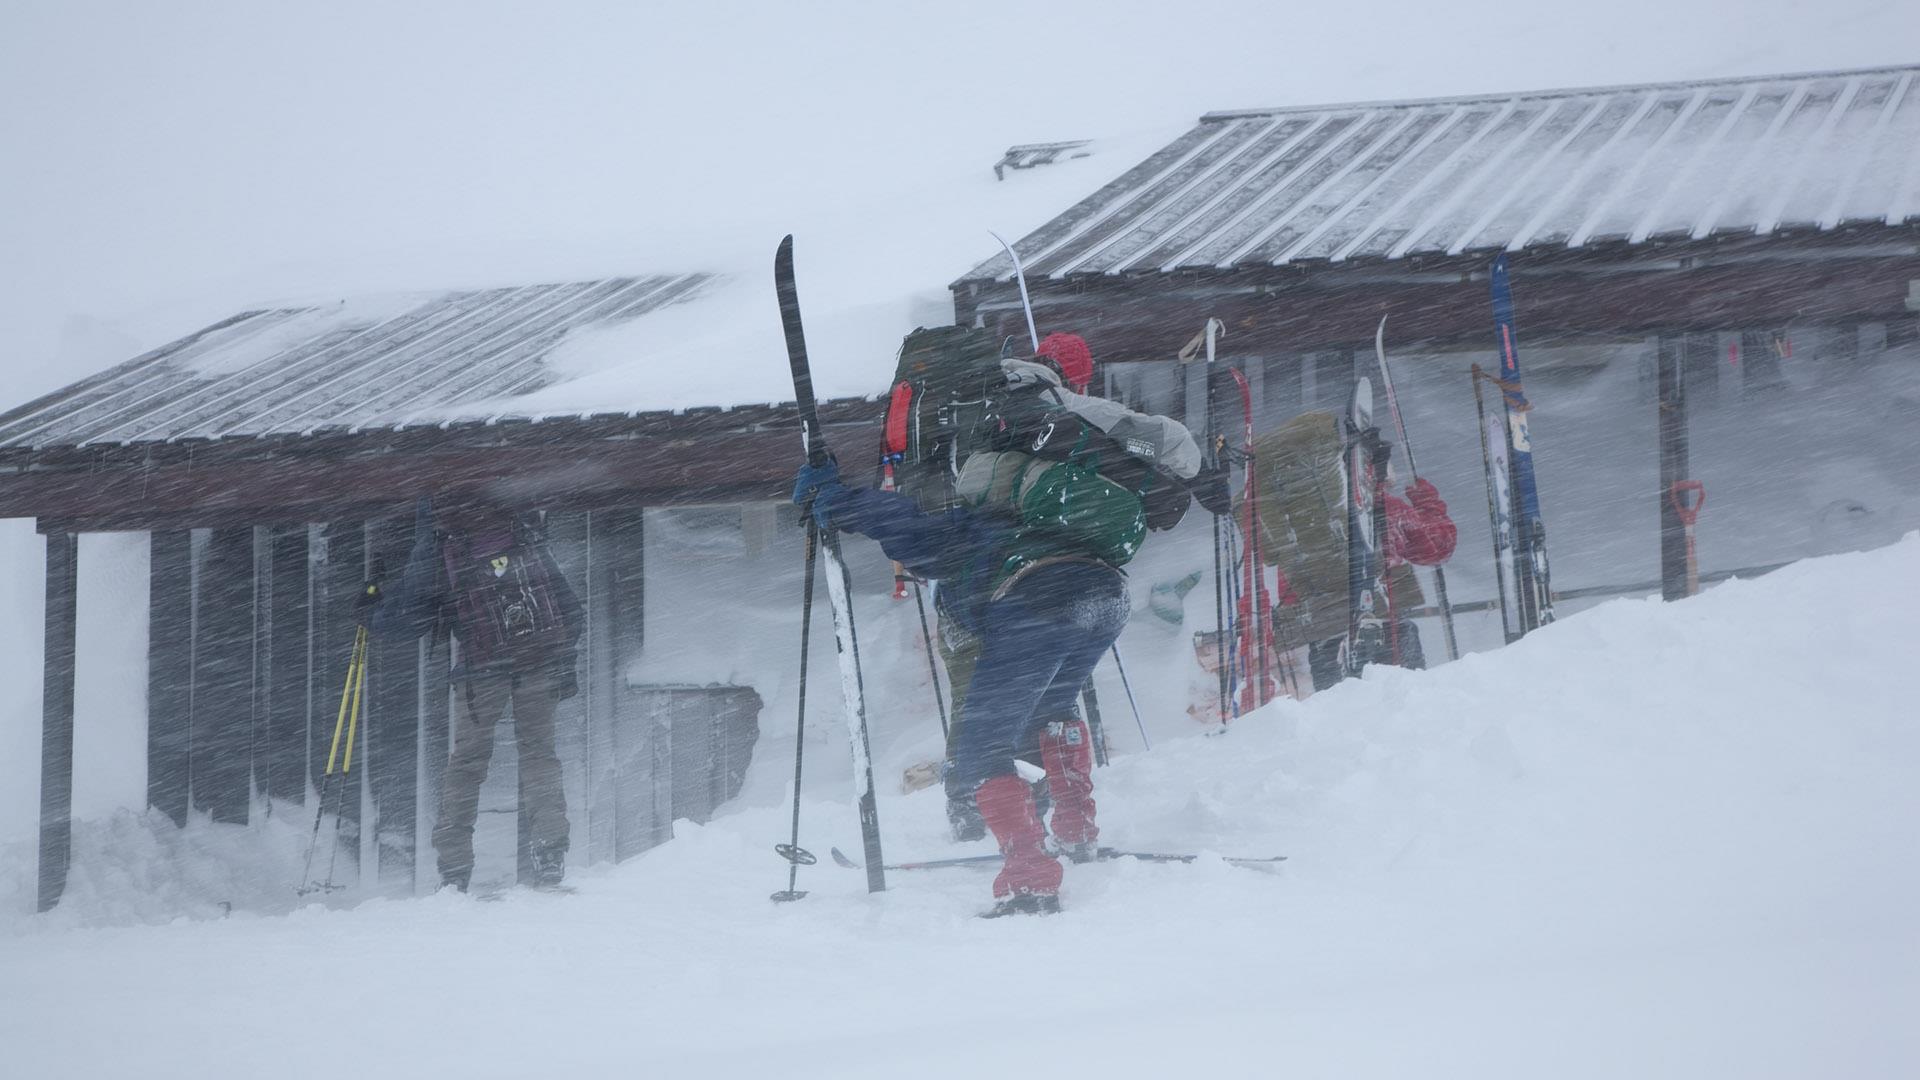 Back-country skiers outside a tourist cabin in the mountains during a blizzard, getting ready to get going.